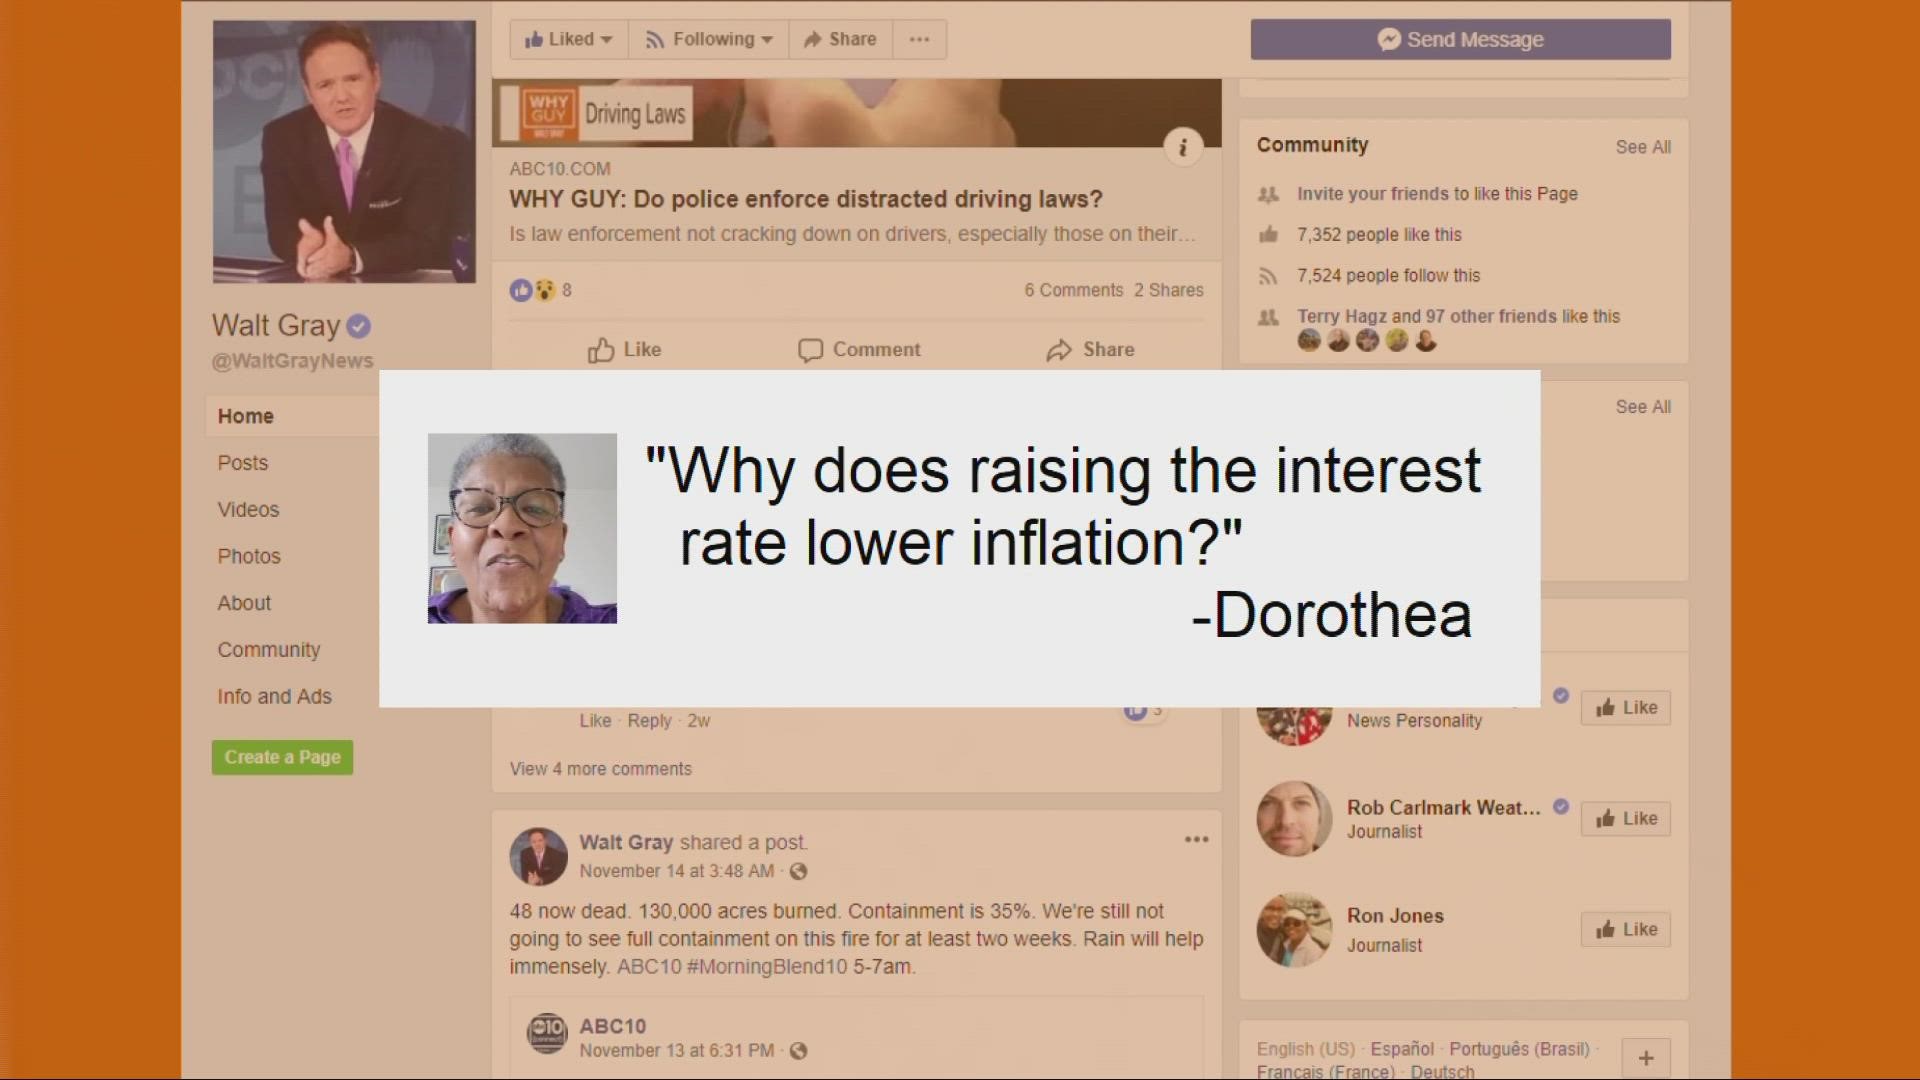 ABC10's Walt Gray helps explain why raising interest rates can lower inflation.